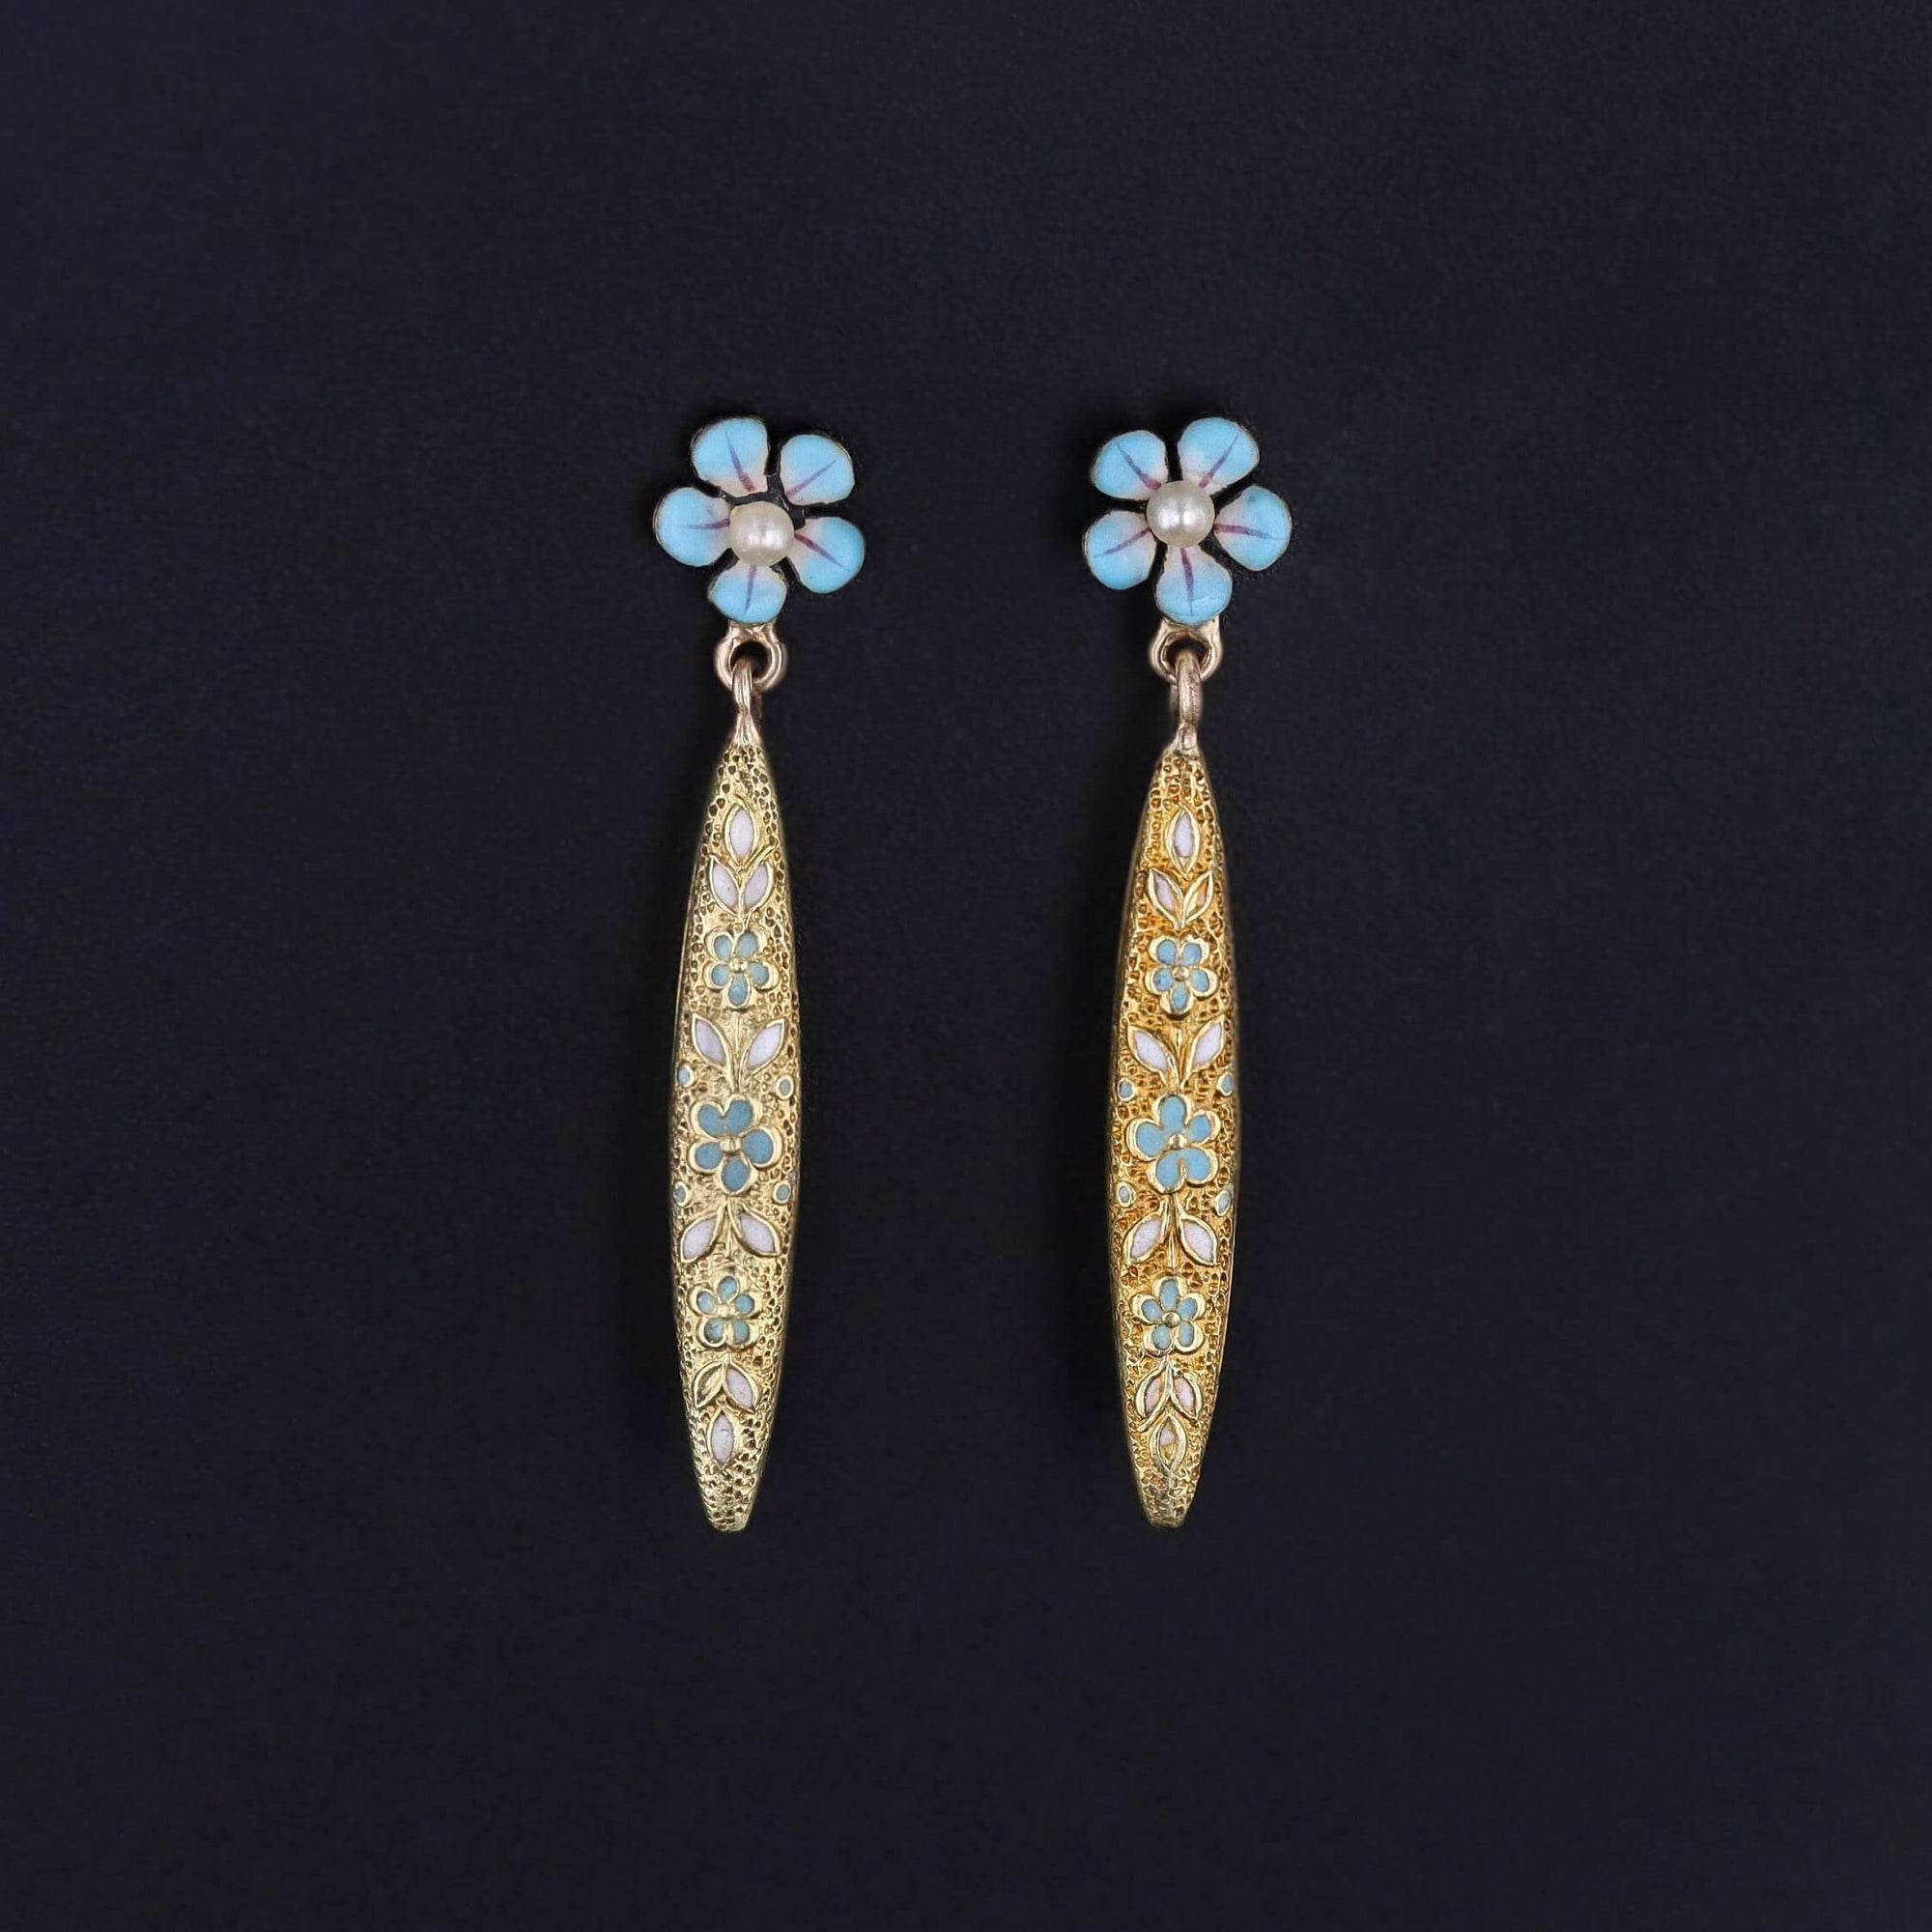 Antique Forget-Me-Not Earrings of 14k Gold